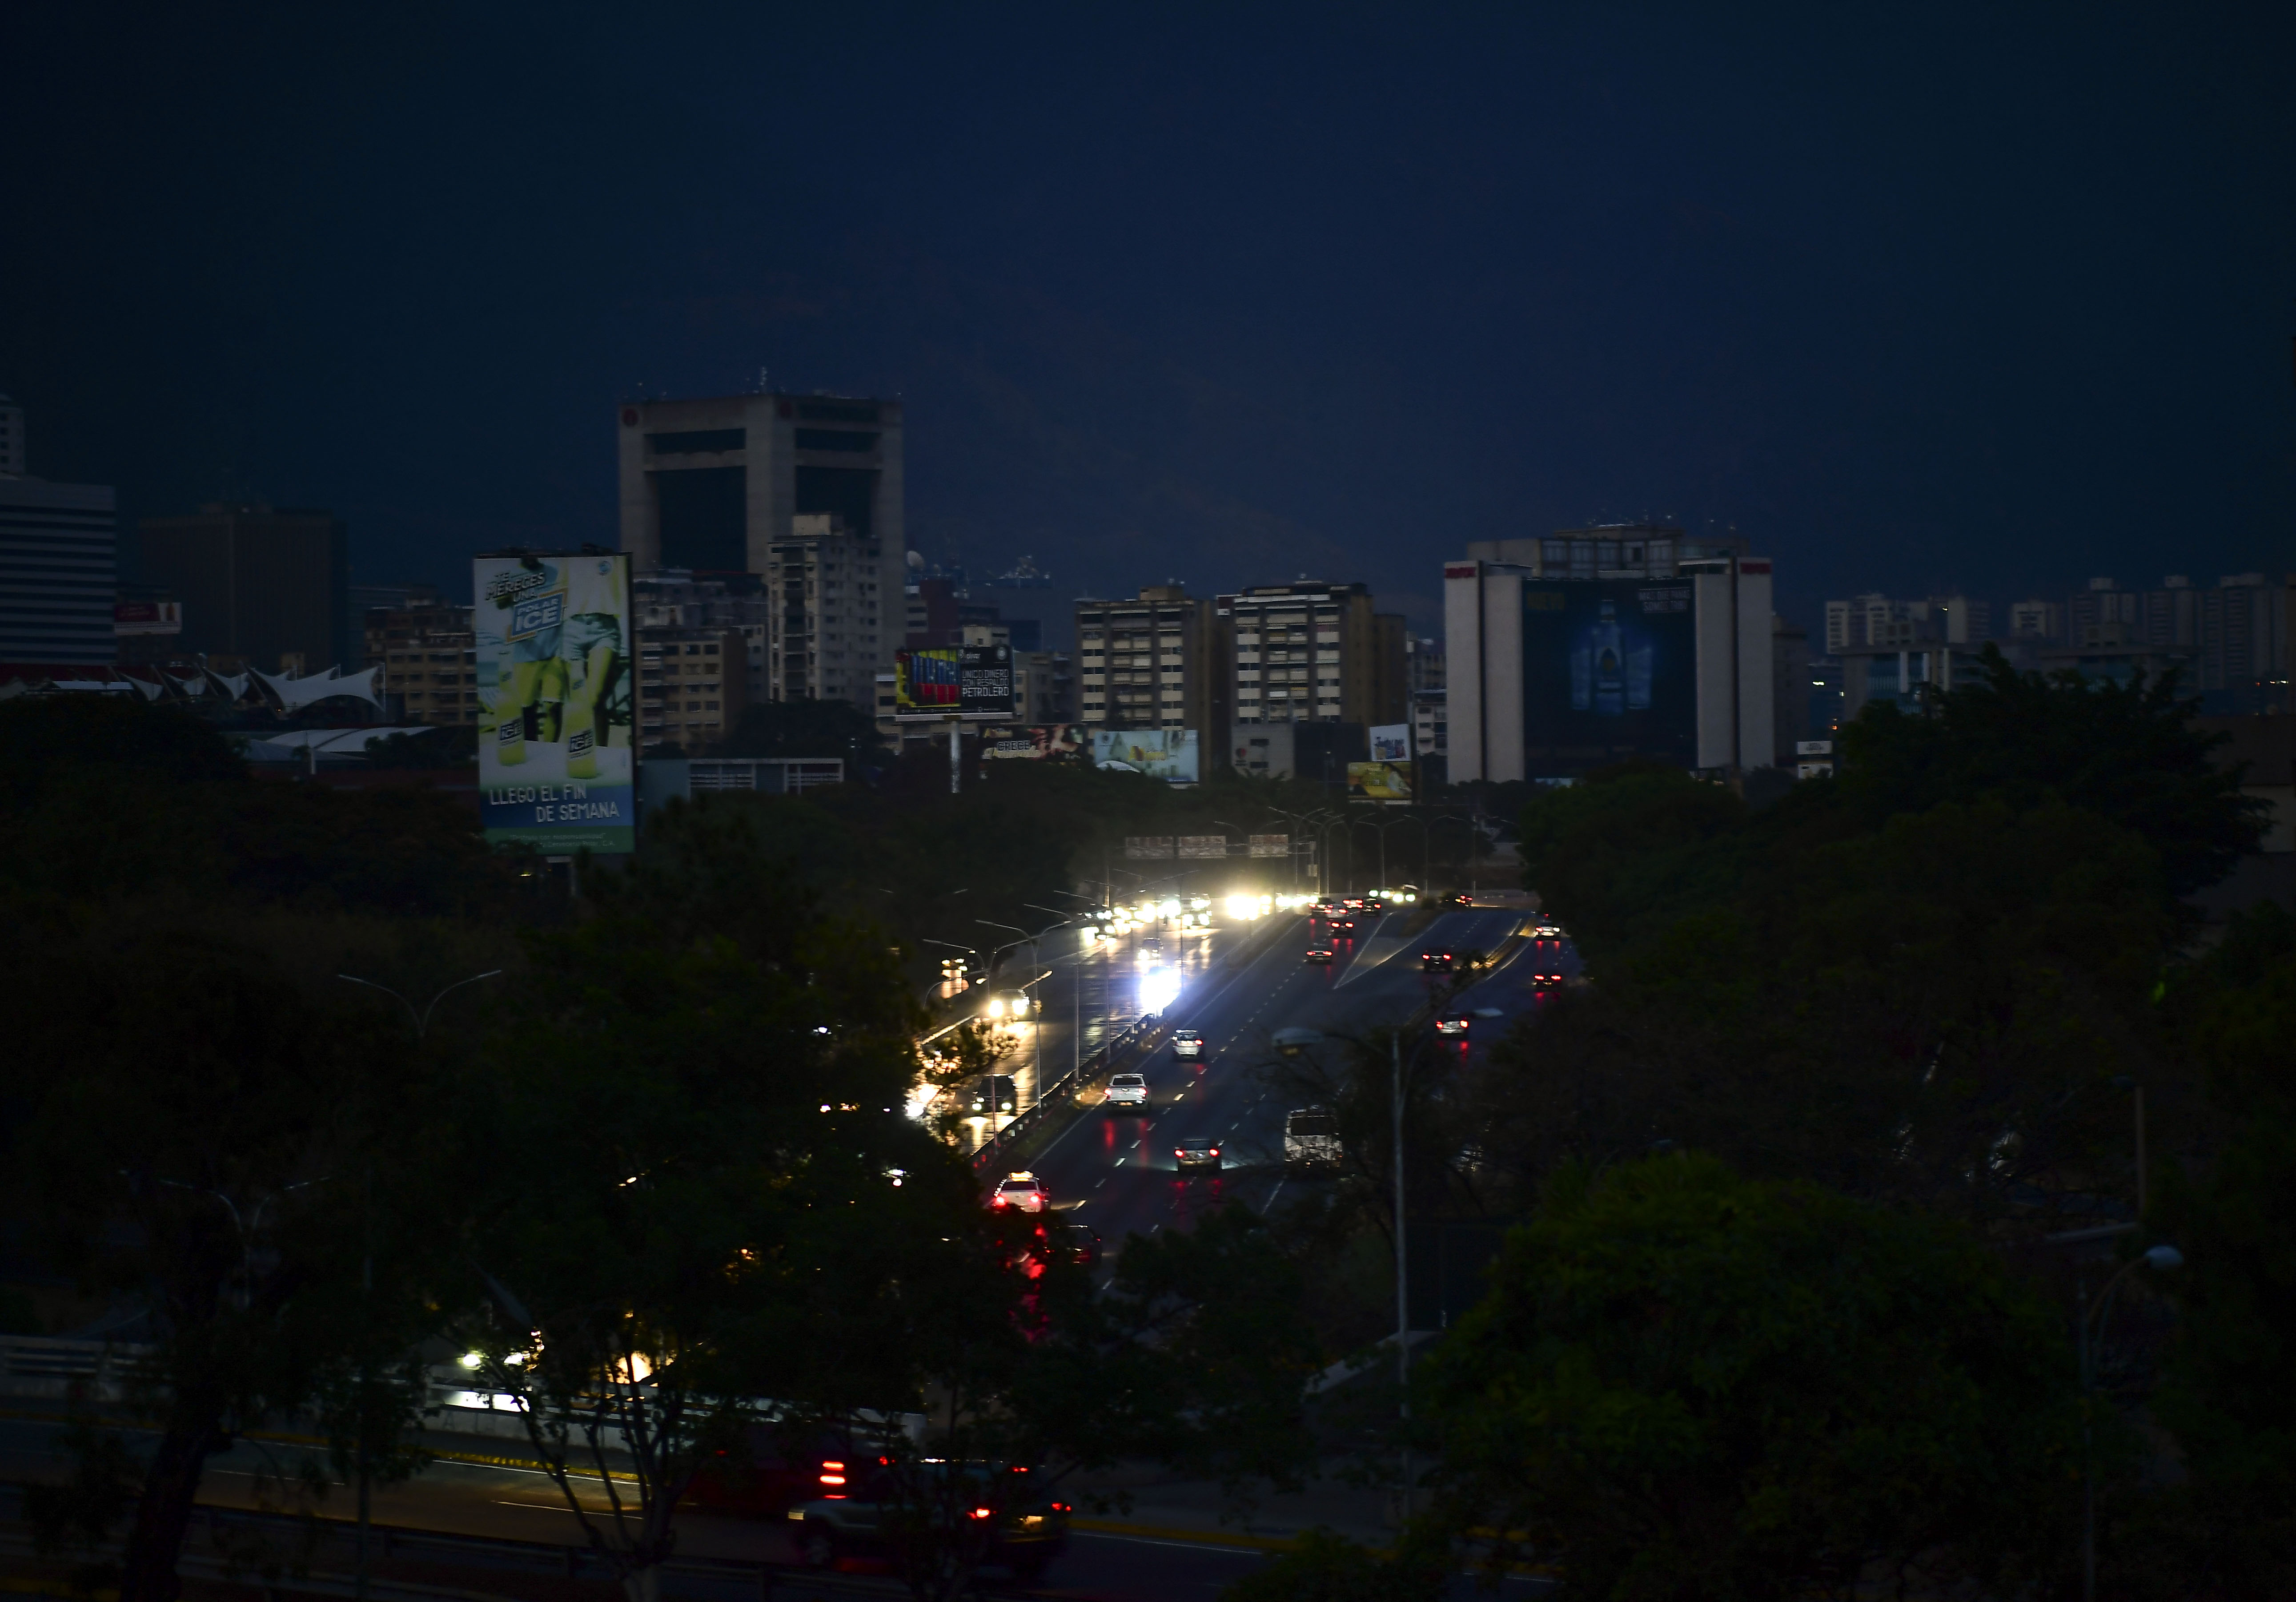 Venezuela struggles with blackout as government claims sabotage